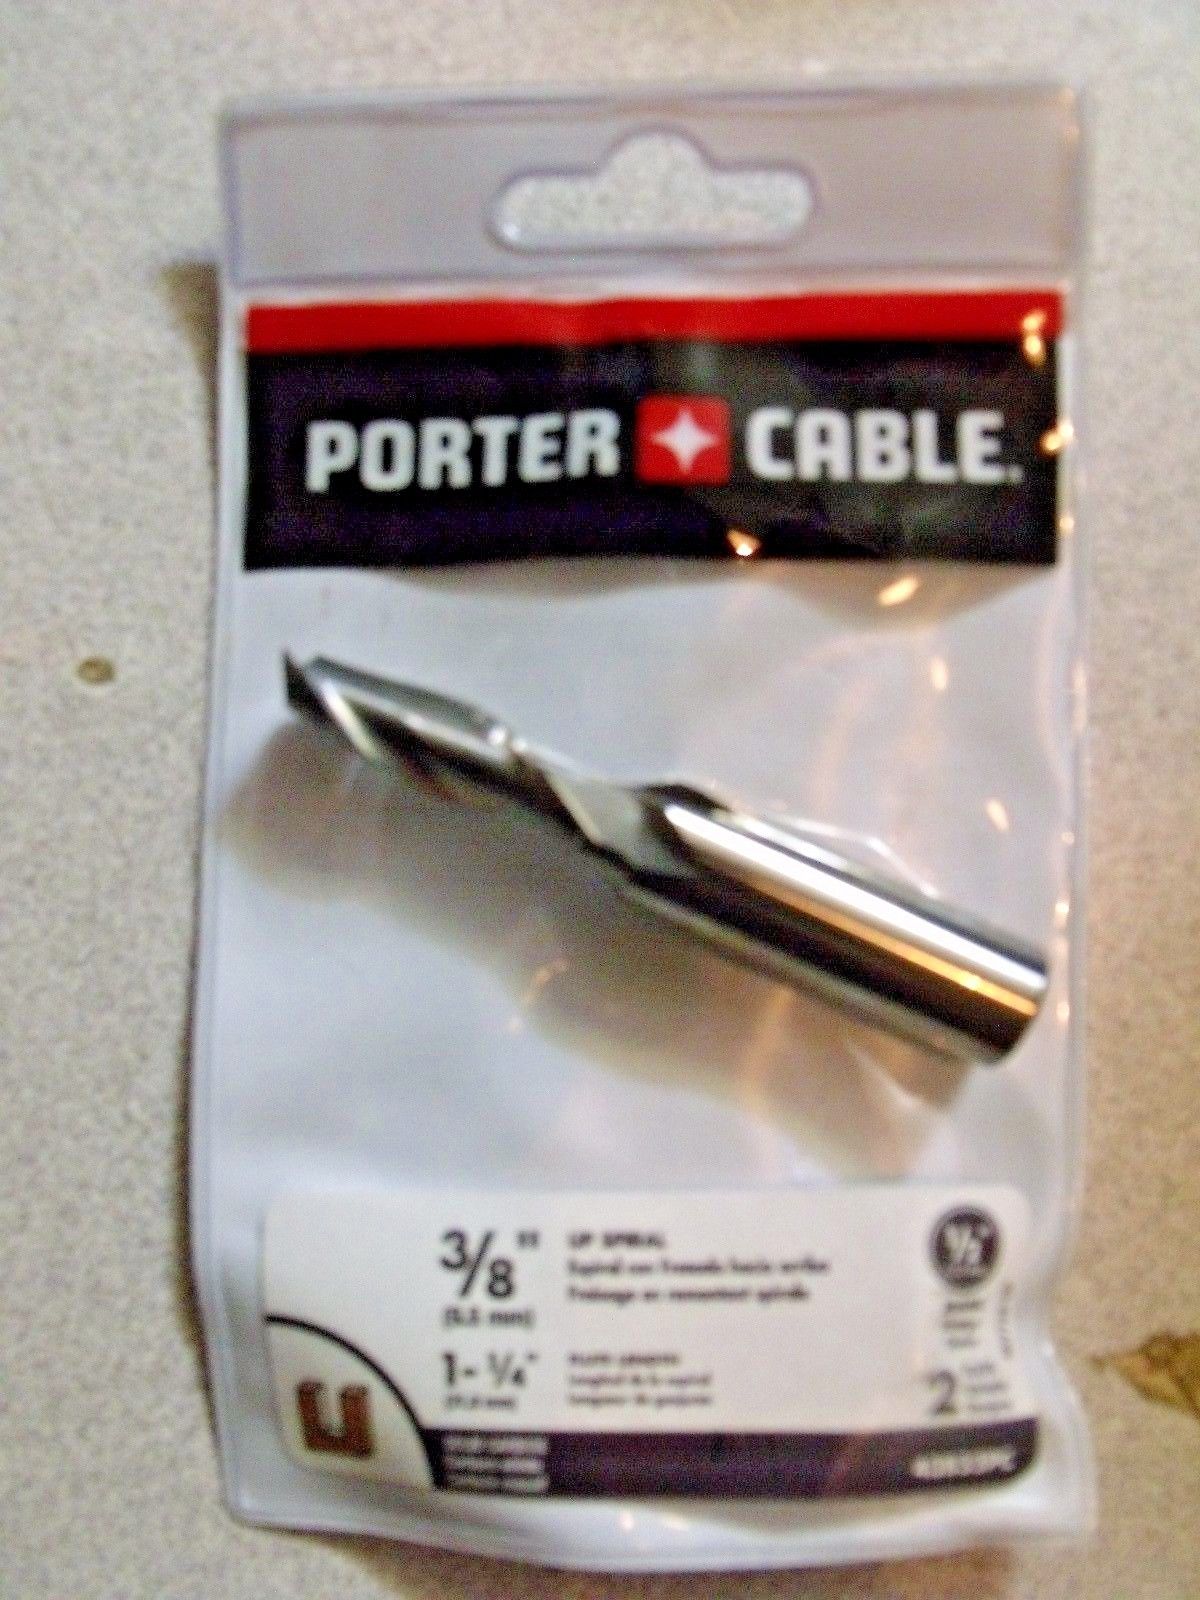 Porter Cable 43833PC Straight Up-Cut Spiral Router Bit